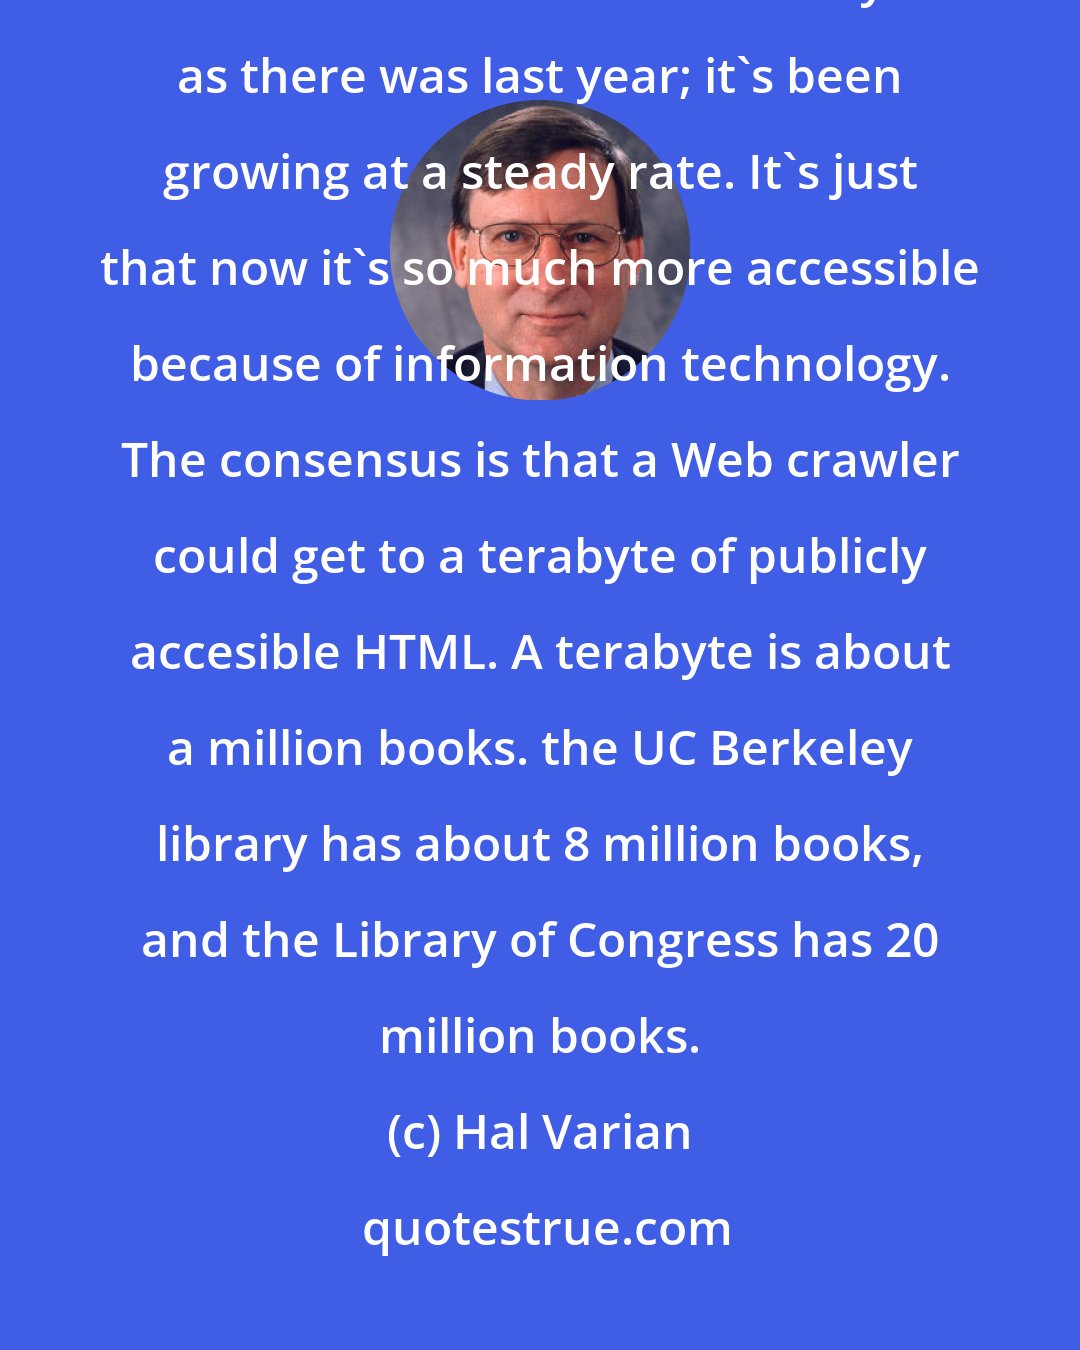 Hal Varian: It isn't that information is exploding, but accessibility is. There's just about as much information this year as there was last year; it's been growing at a steady rate. It's just that now it's so much more accessible because of information technology. The consensus is that a Web crawler could get to a terabyte of publicly accesible HTML. A terabyte is about a million books. the UC Berkeley library has about 8 million books, and the Library of Congress has 20 million books.